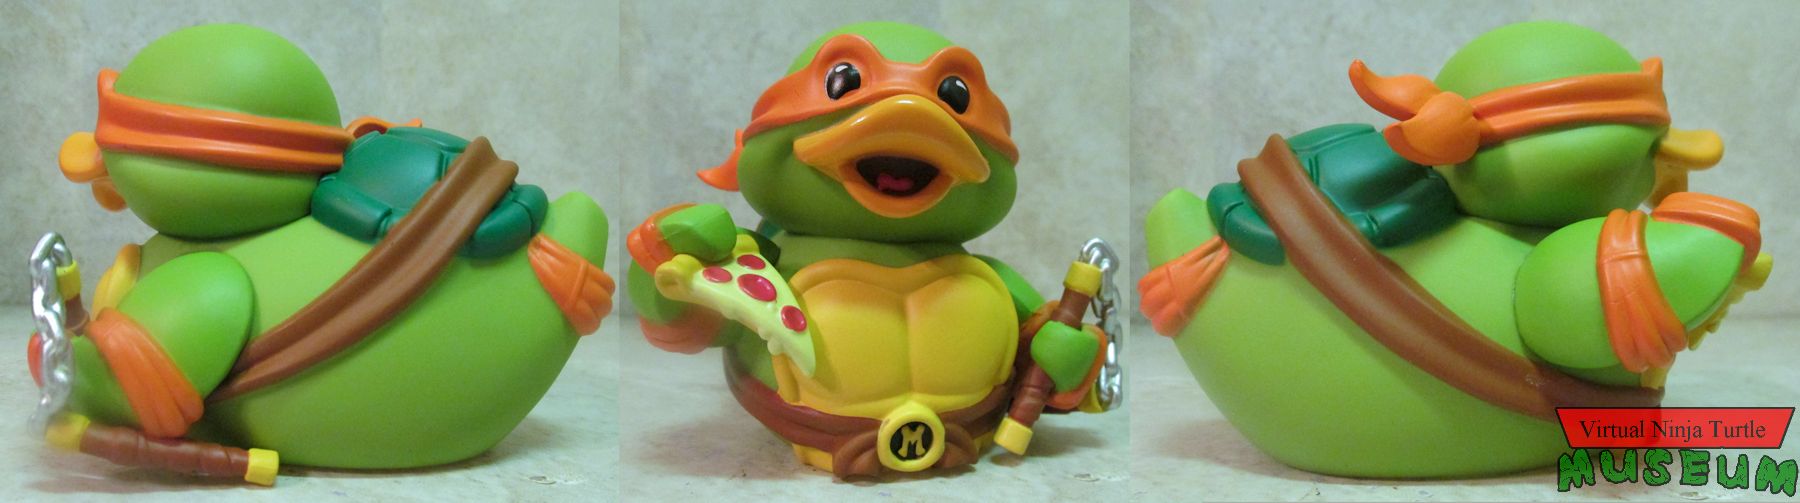 Tubbz Michelangelo front and sides